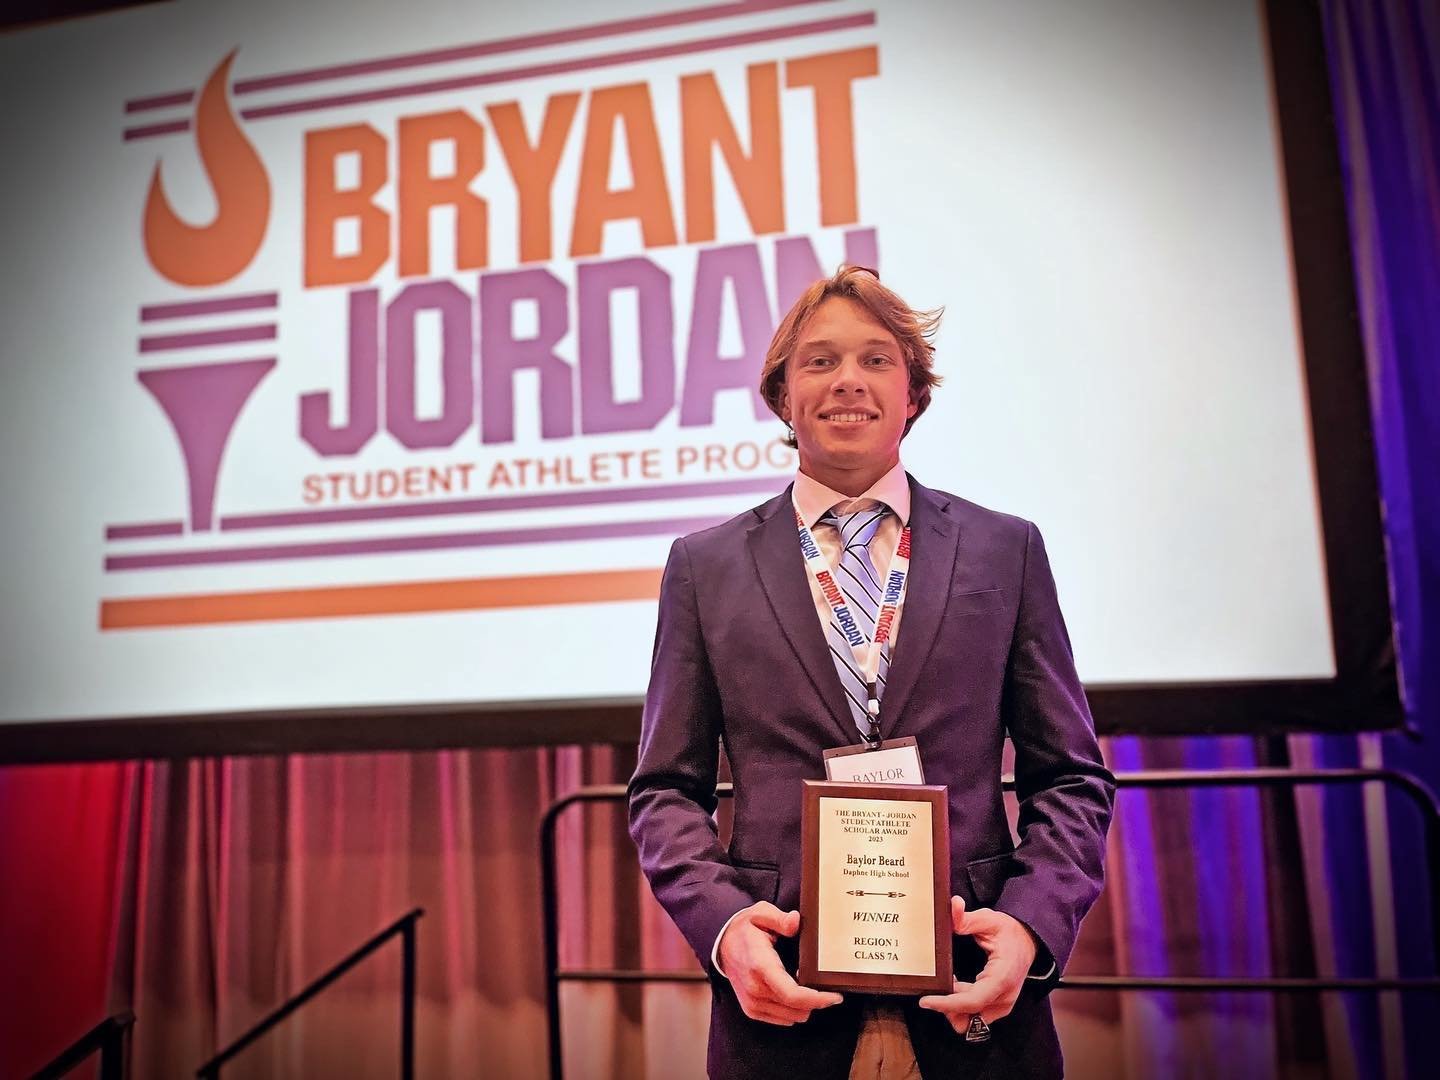 Daphne senior Baylor Beard, an all-county football and soccer player, was recognized as a regional winner of a $3,000 scholarship at the 38th annual Bryant-Jordan Awards Banquet Monday, April 10, in Birmingham. Last spring, Beard was part of the Trojans’ first state-championship soccer team with a 16-1 overall record.